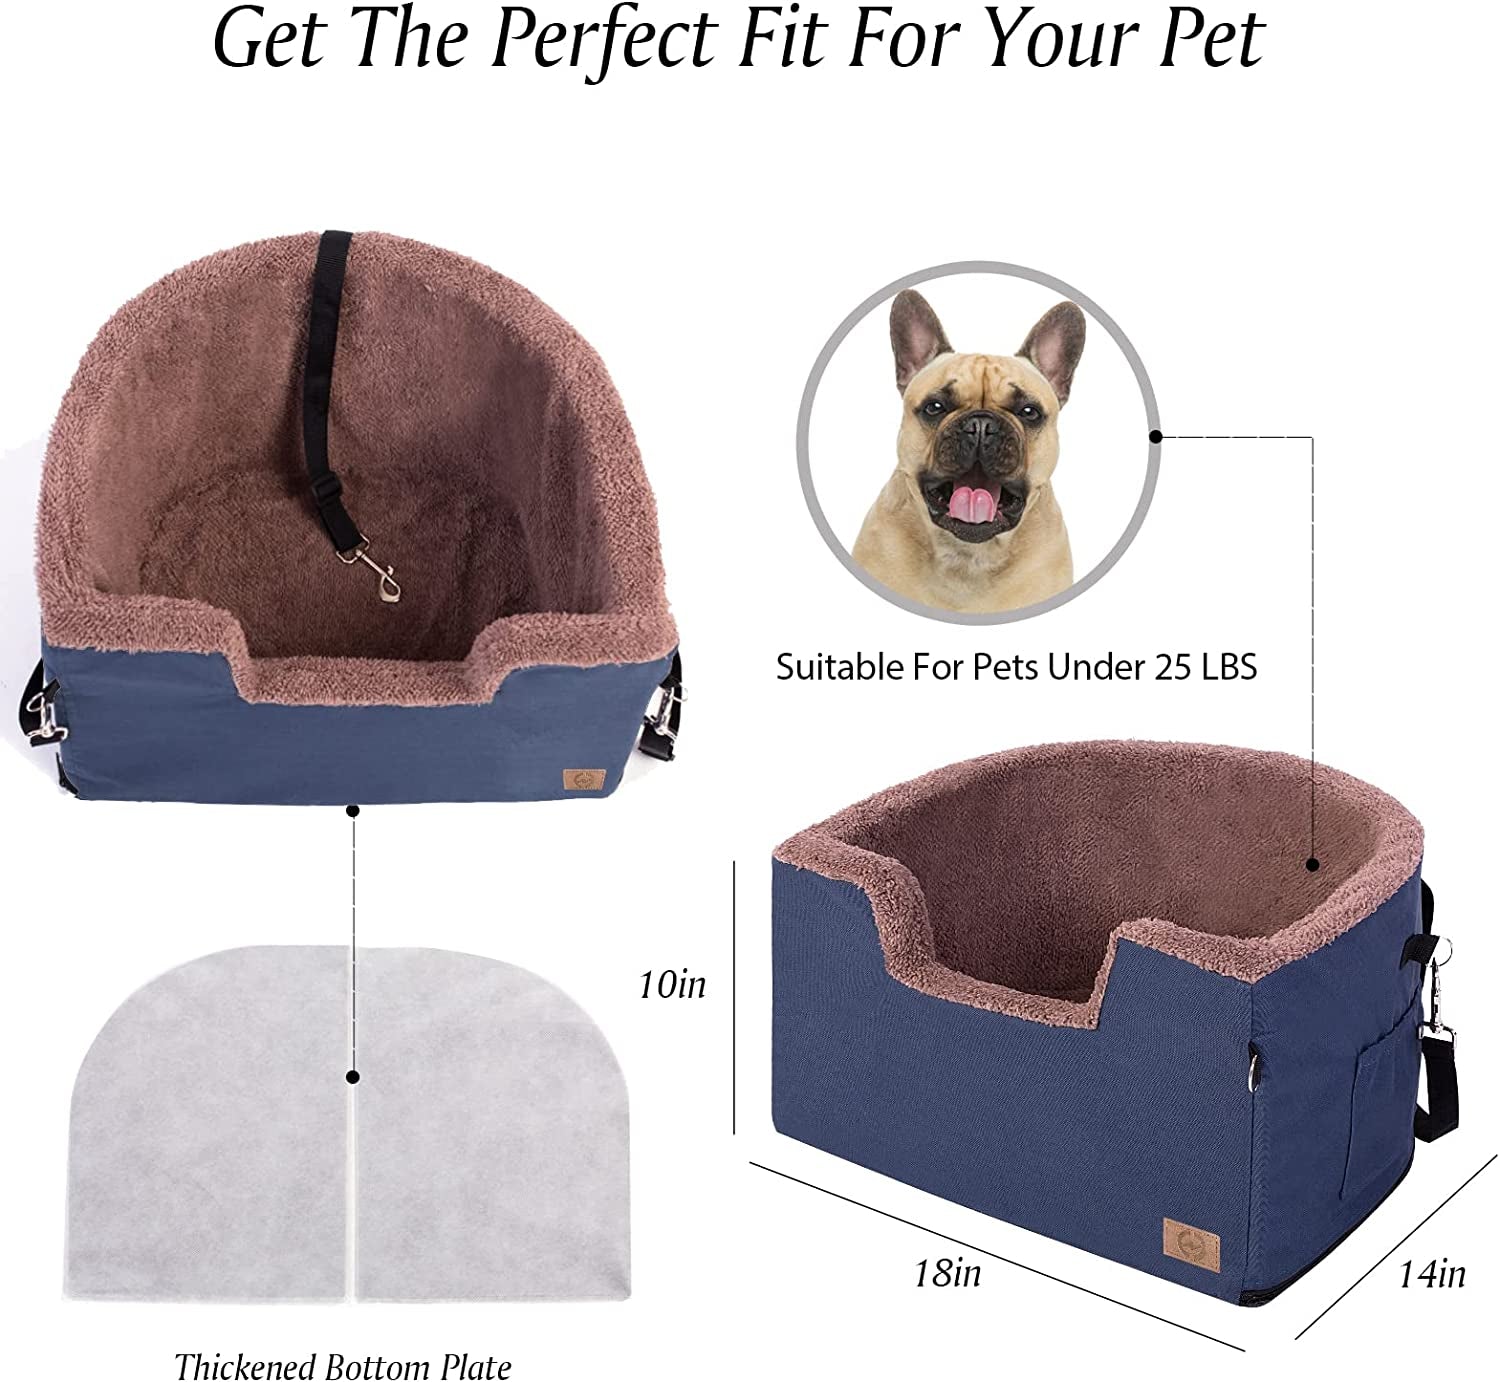 Dog Car Seat, Dog Booster Seat for Car Front Seat, Elevated Pet Bed fo
Elevated For a Better View: The dog window seat can be boosted up for a better window view and improve security for your lovely puppy while you are driving.
Safe trDog Car Seat, Dog Booster Seat